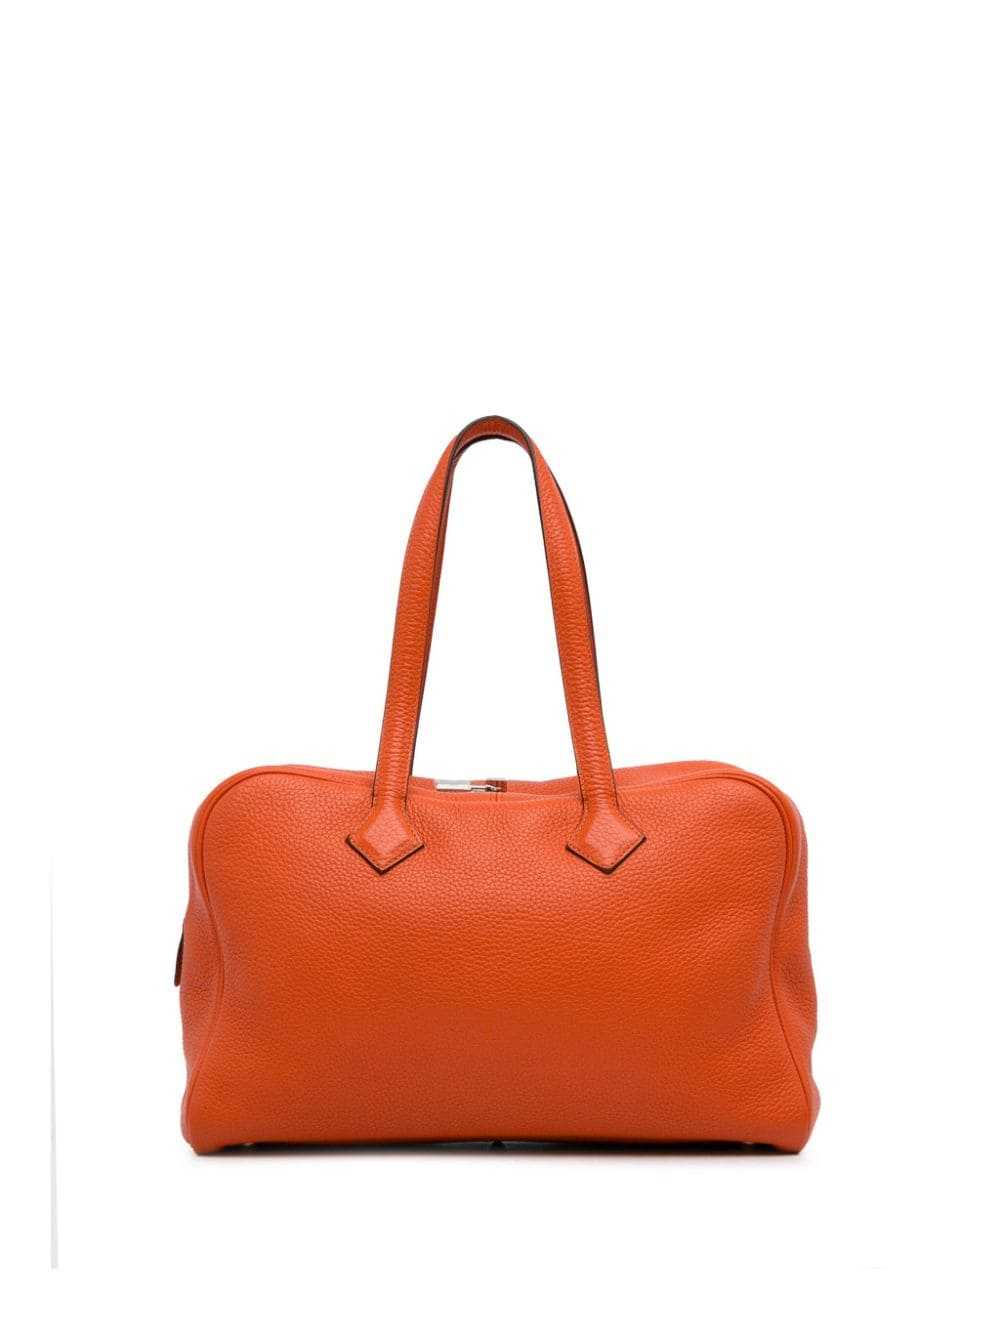 Hermès Pre-Owned 2014 Clemence Victoria II 35 sho… - image 2